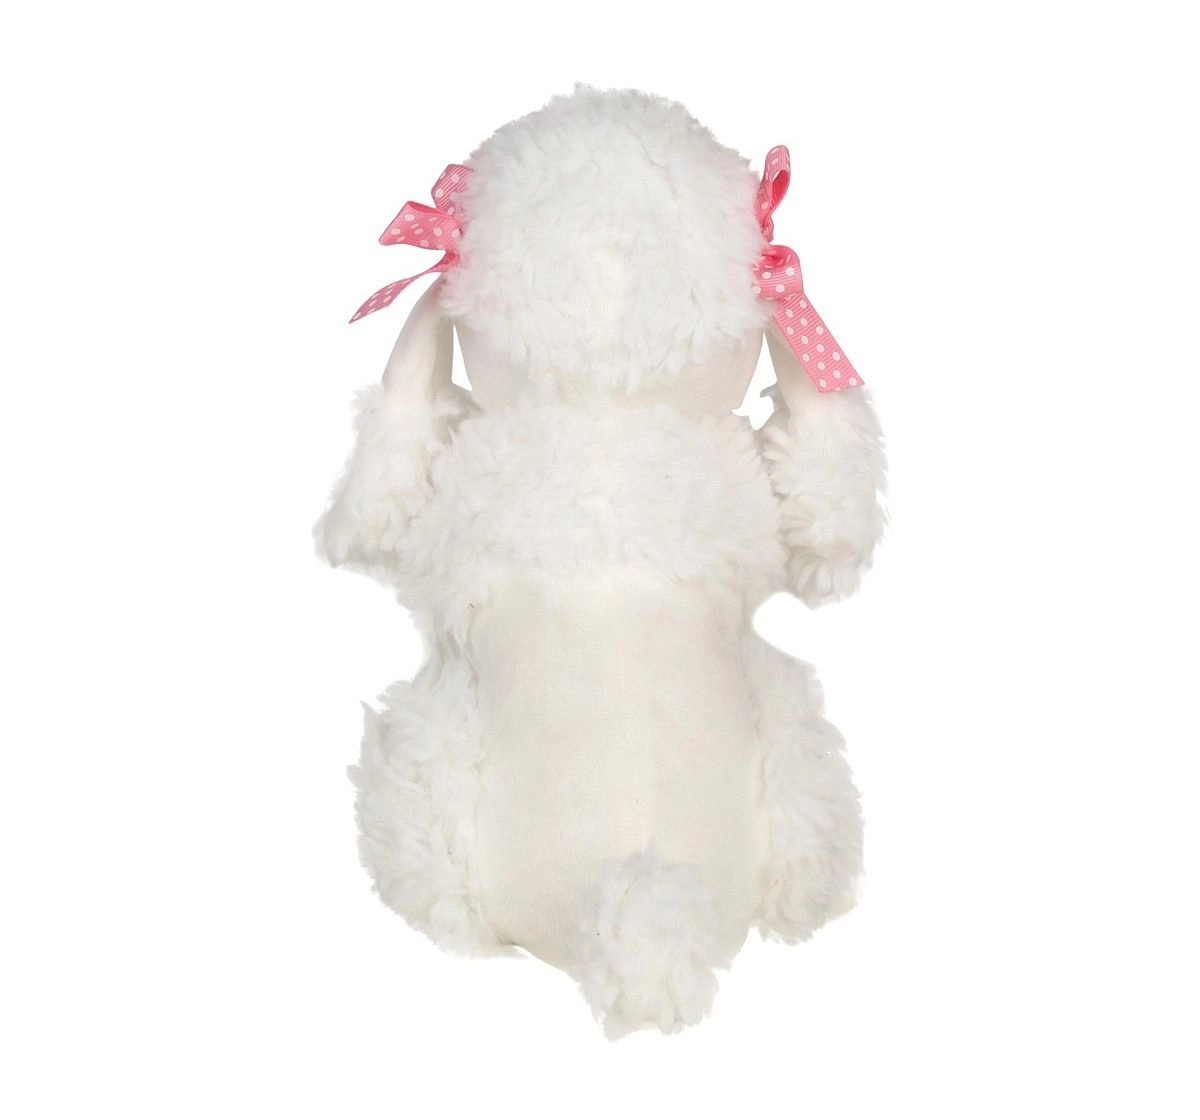 Cuddles Poodle Dog 6 Cms Plush Toy for New Born Kids age 0M+ (White)